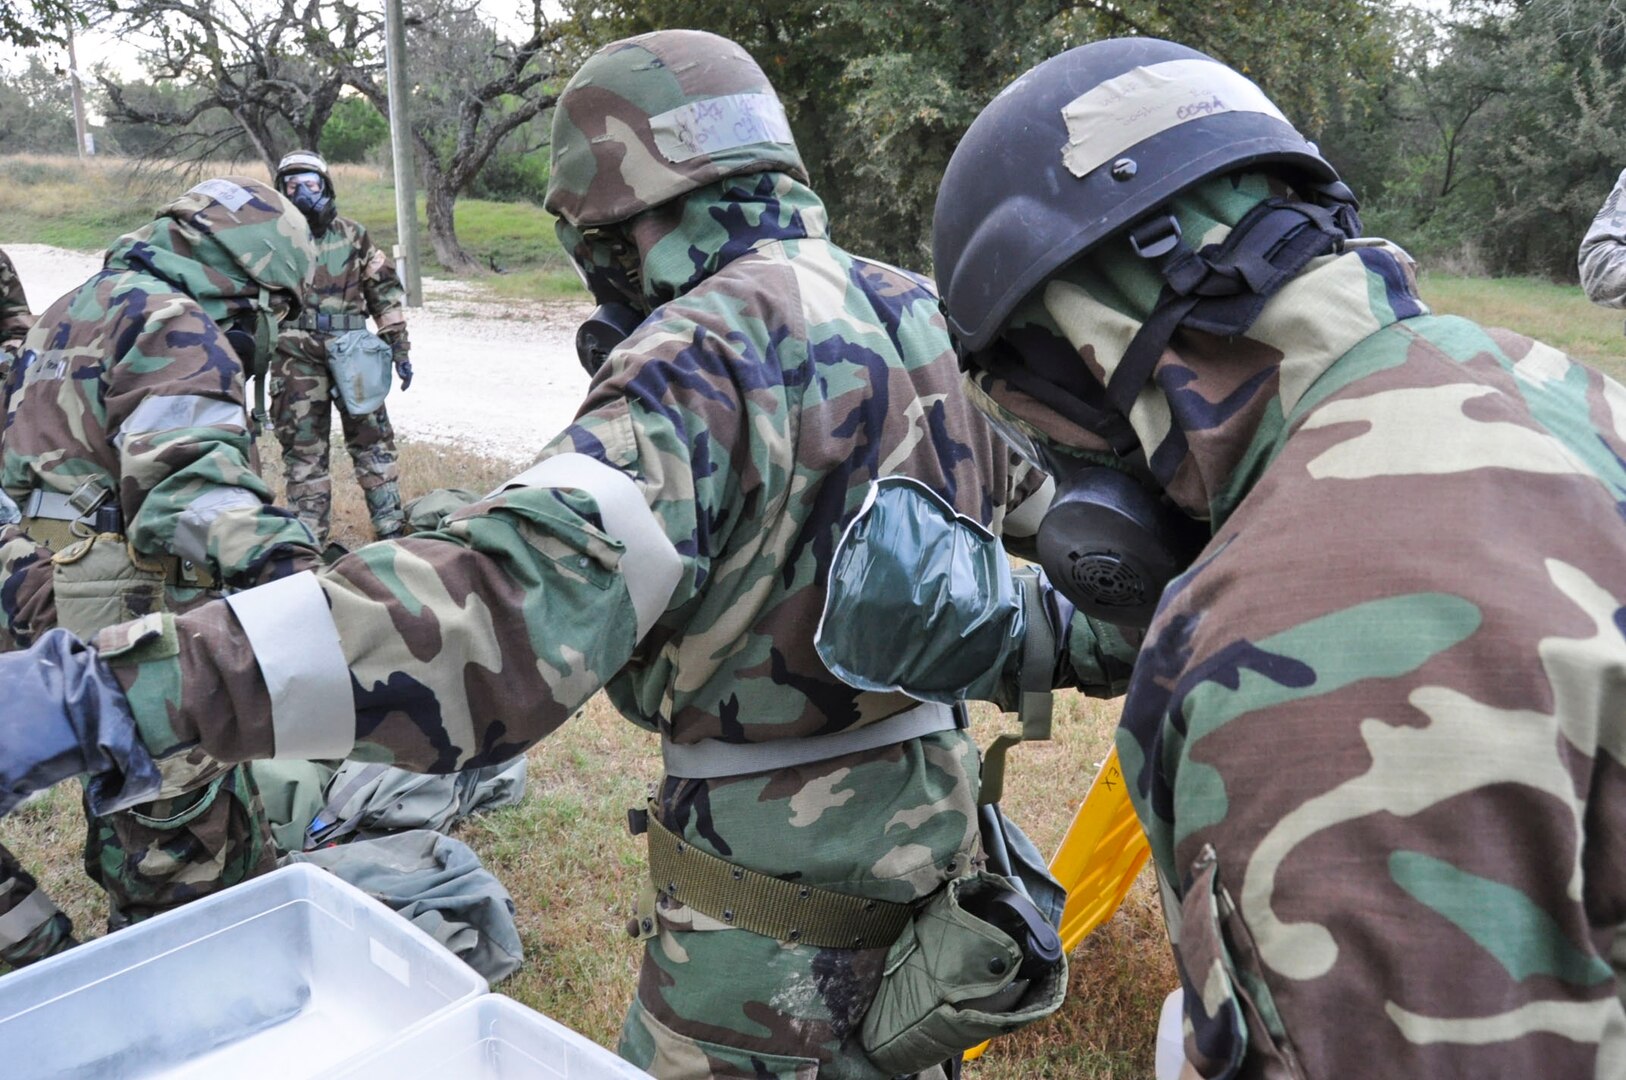 Members of the 433rd Airlift Wing use an M-295 decontamination kit to cleanse one another of any chemical agents at a decontamination checkpoint Nov. 5, 2016 during the Steel Thunder exercise at Joint Base San Antonio-Lackland. Members rely heavily on the buddy system during exercises such as Steel Thunder to ensure maximum protection of assets and military personnel. (U.S. Air Force photo/Senior Airman Bryan Swink)  